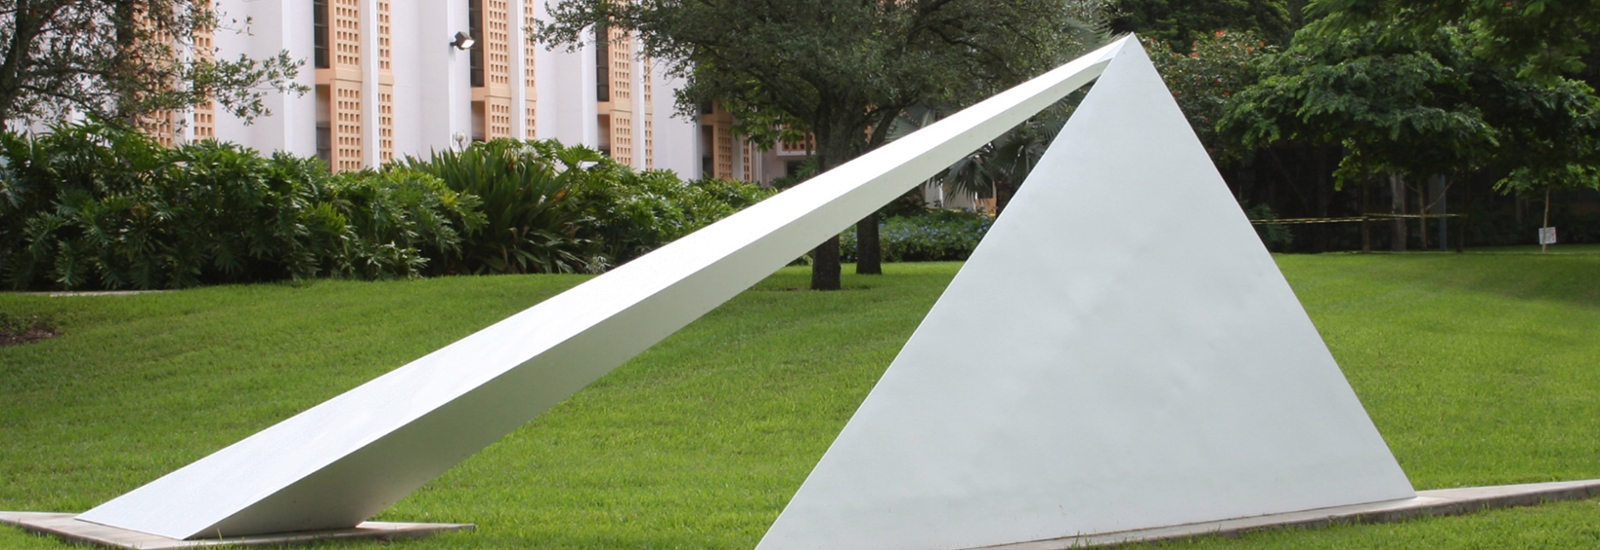 outdoor metal sculpture painted white consiting of triangular shapes leaning against one another